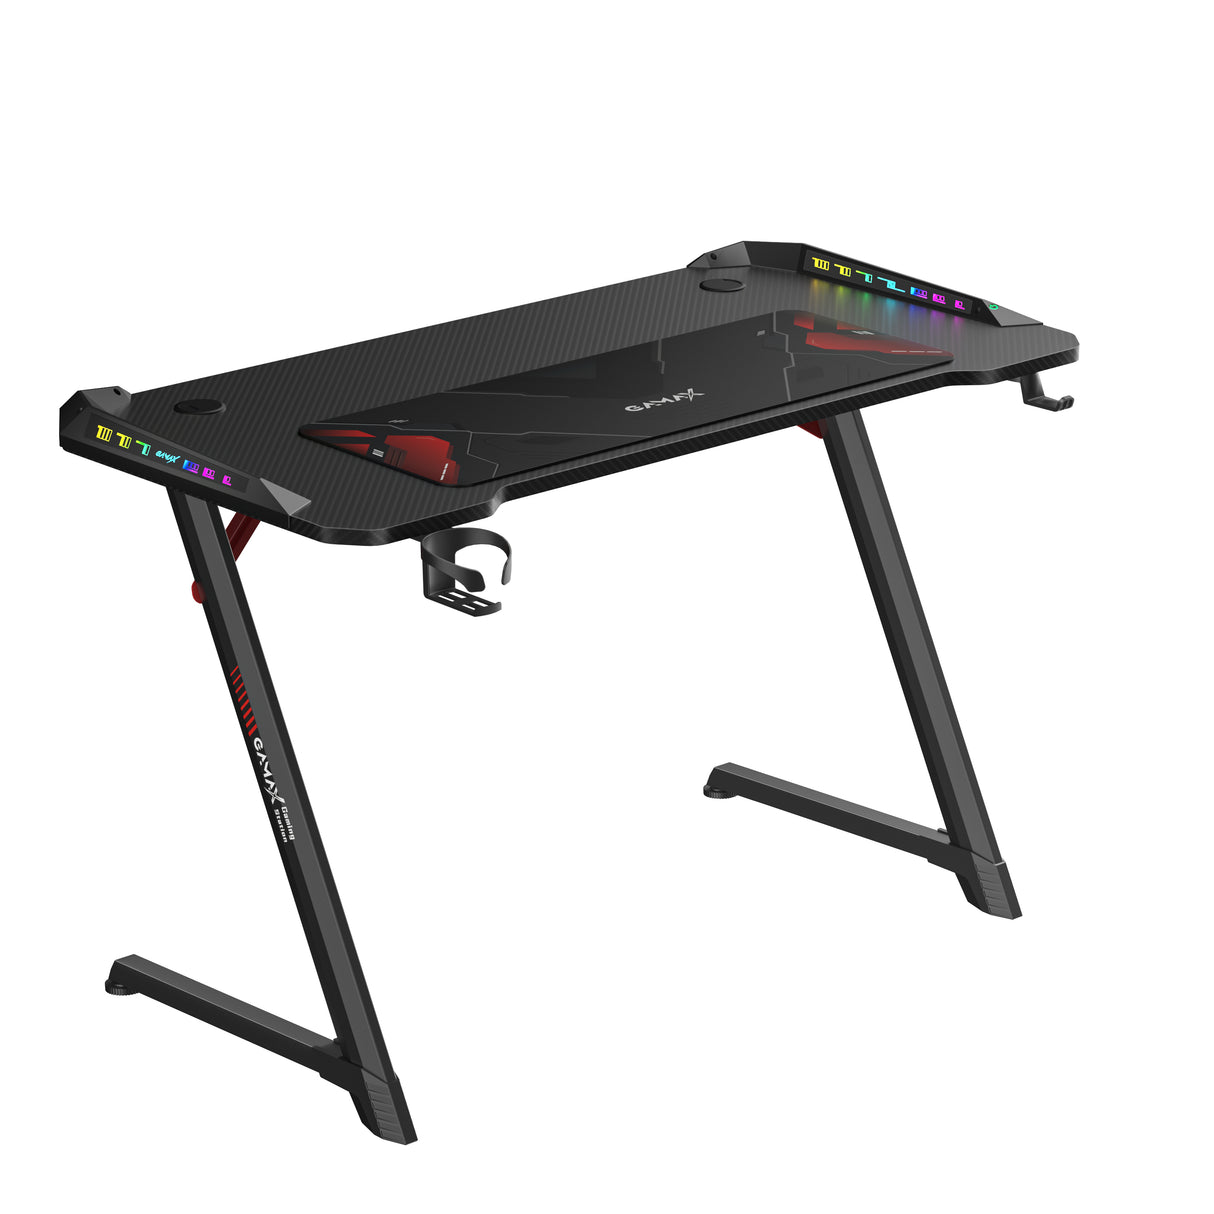 Gamax TD-03 Carbon Fiber Gaming Table 100*60*75cm with RGB Light & MousePad